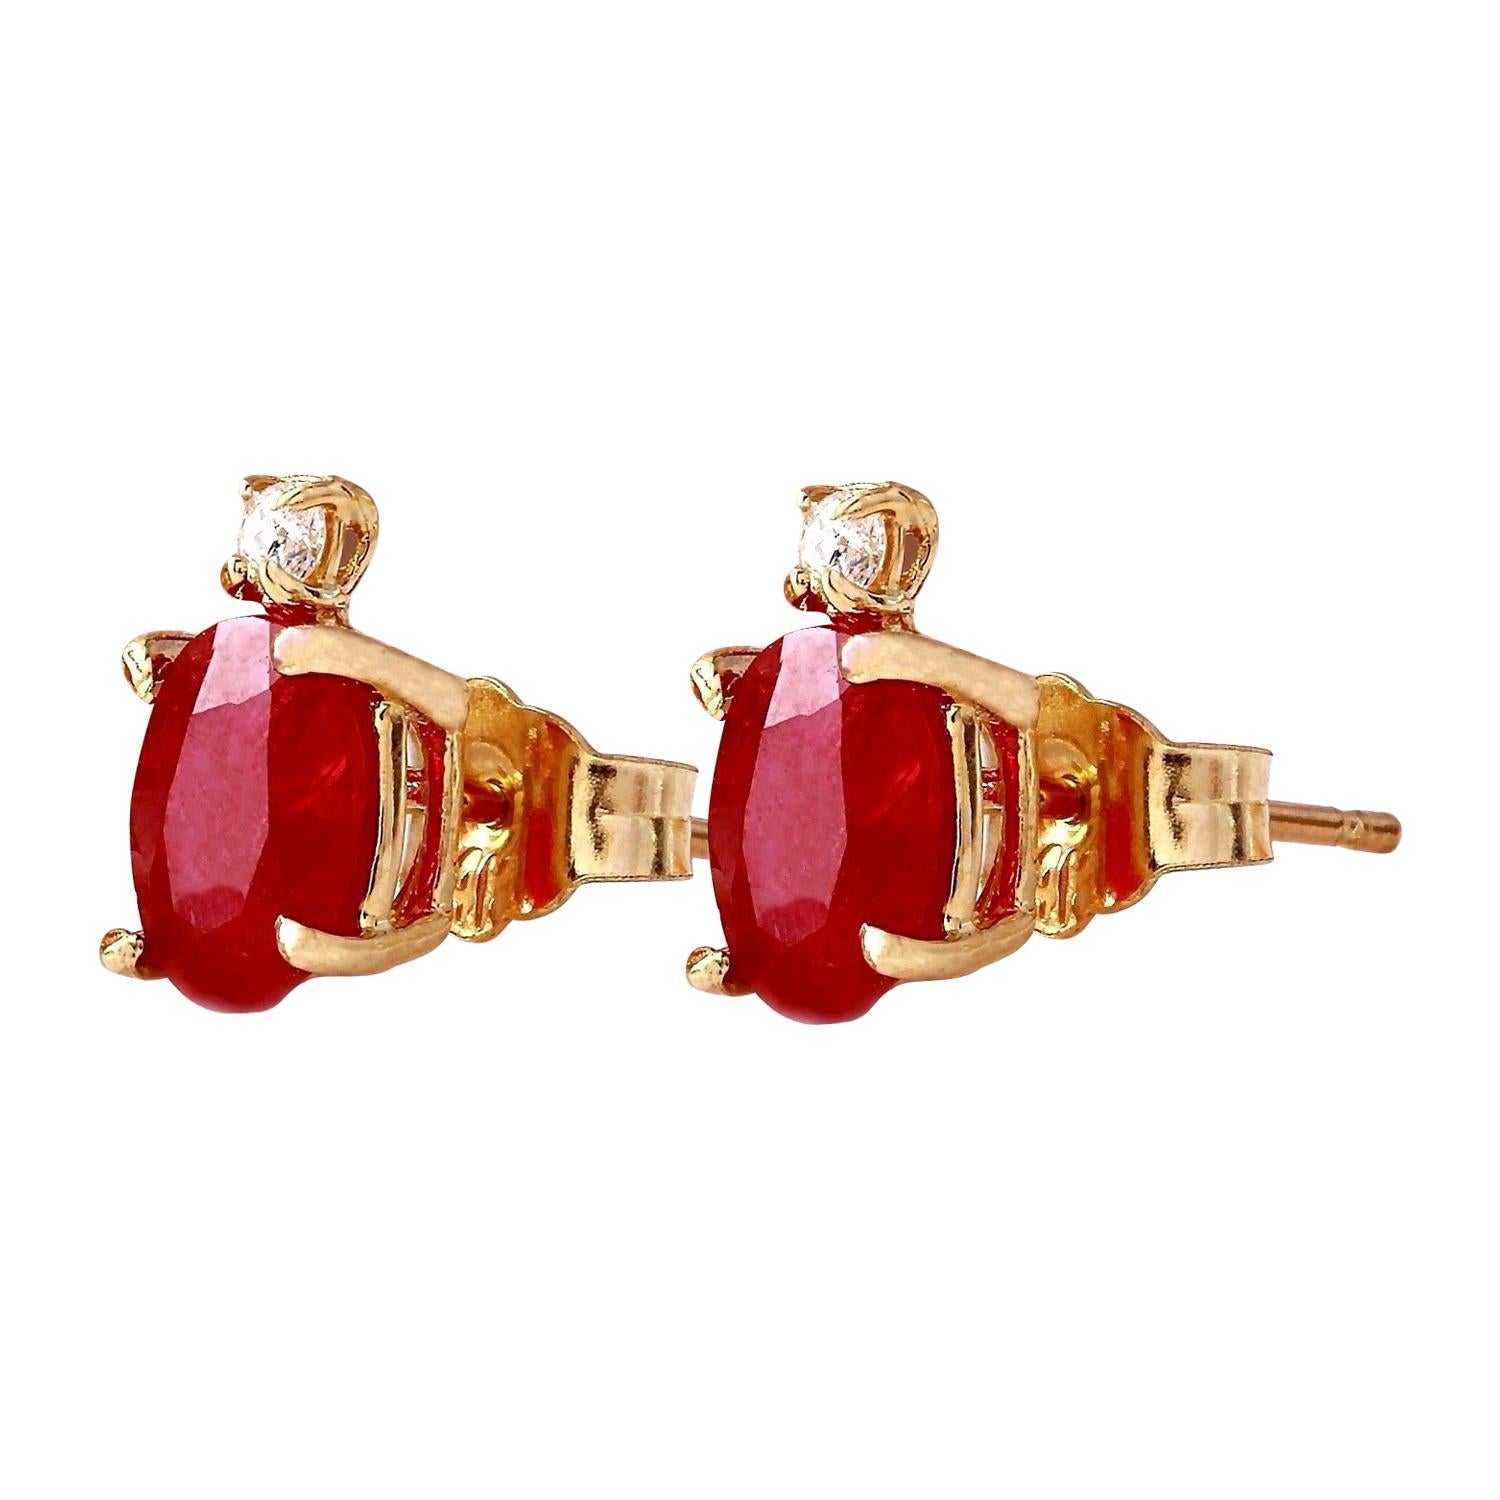 1.76 Carat Natural Ruby 14K Solid Yellow Gold Diamond Stud Earrings
 Item Type: Earrings
 Item Style: Stud
 Item Length: 9.55 mm
 Item Width: 5.17 mm
 Material: 14K Yellow Gold
 Mainstone: Ruby
 Stone Color: Red
 Stone Weight: 1.70 Carat
 Stone